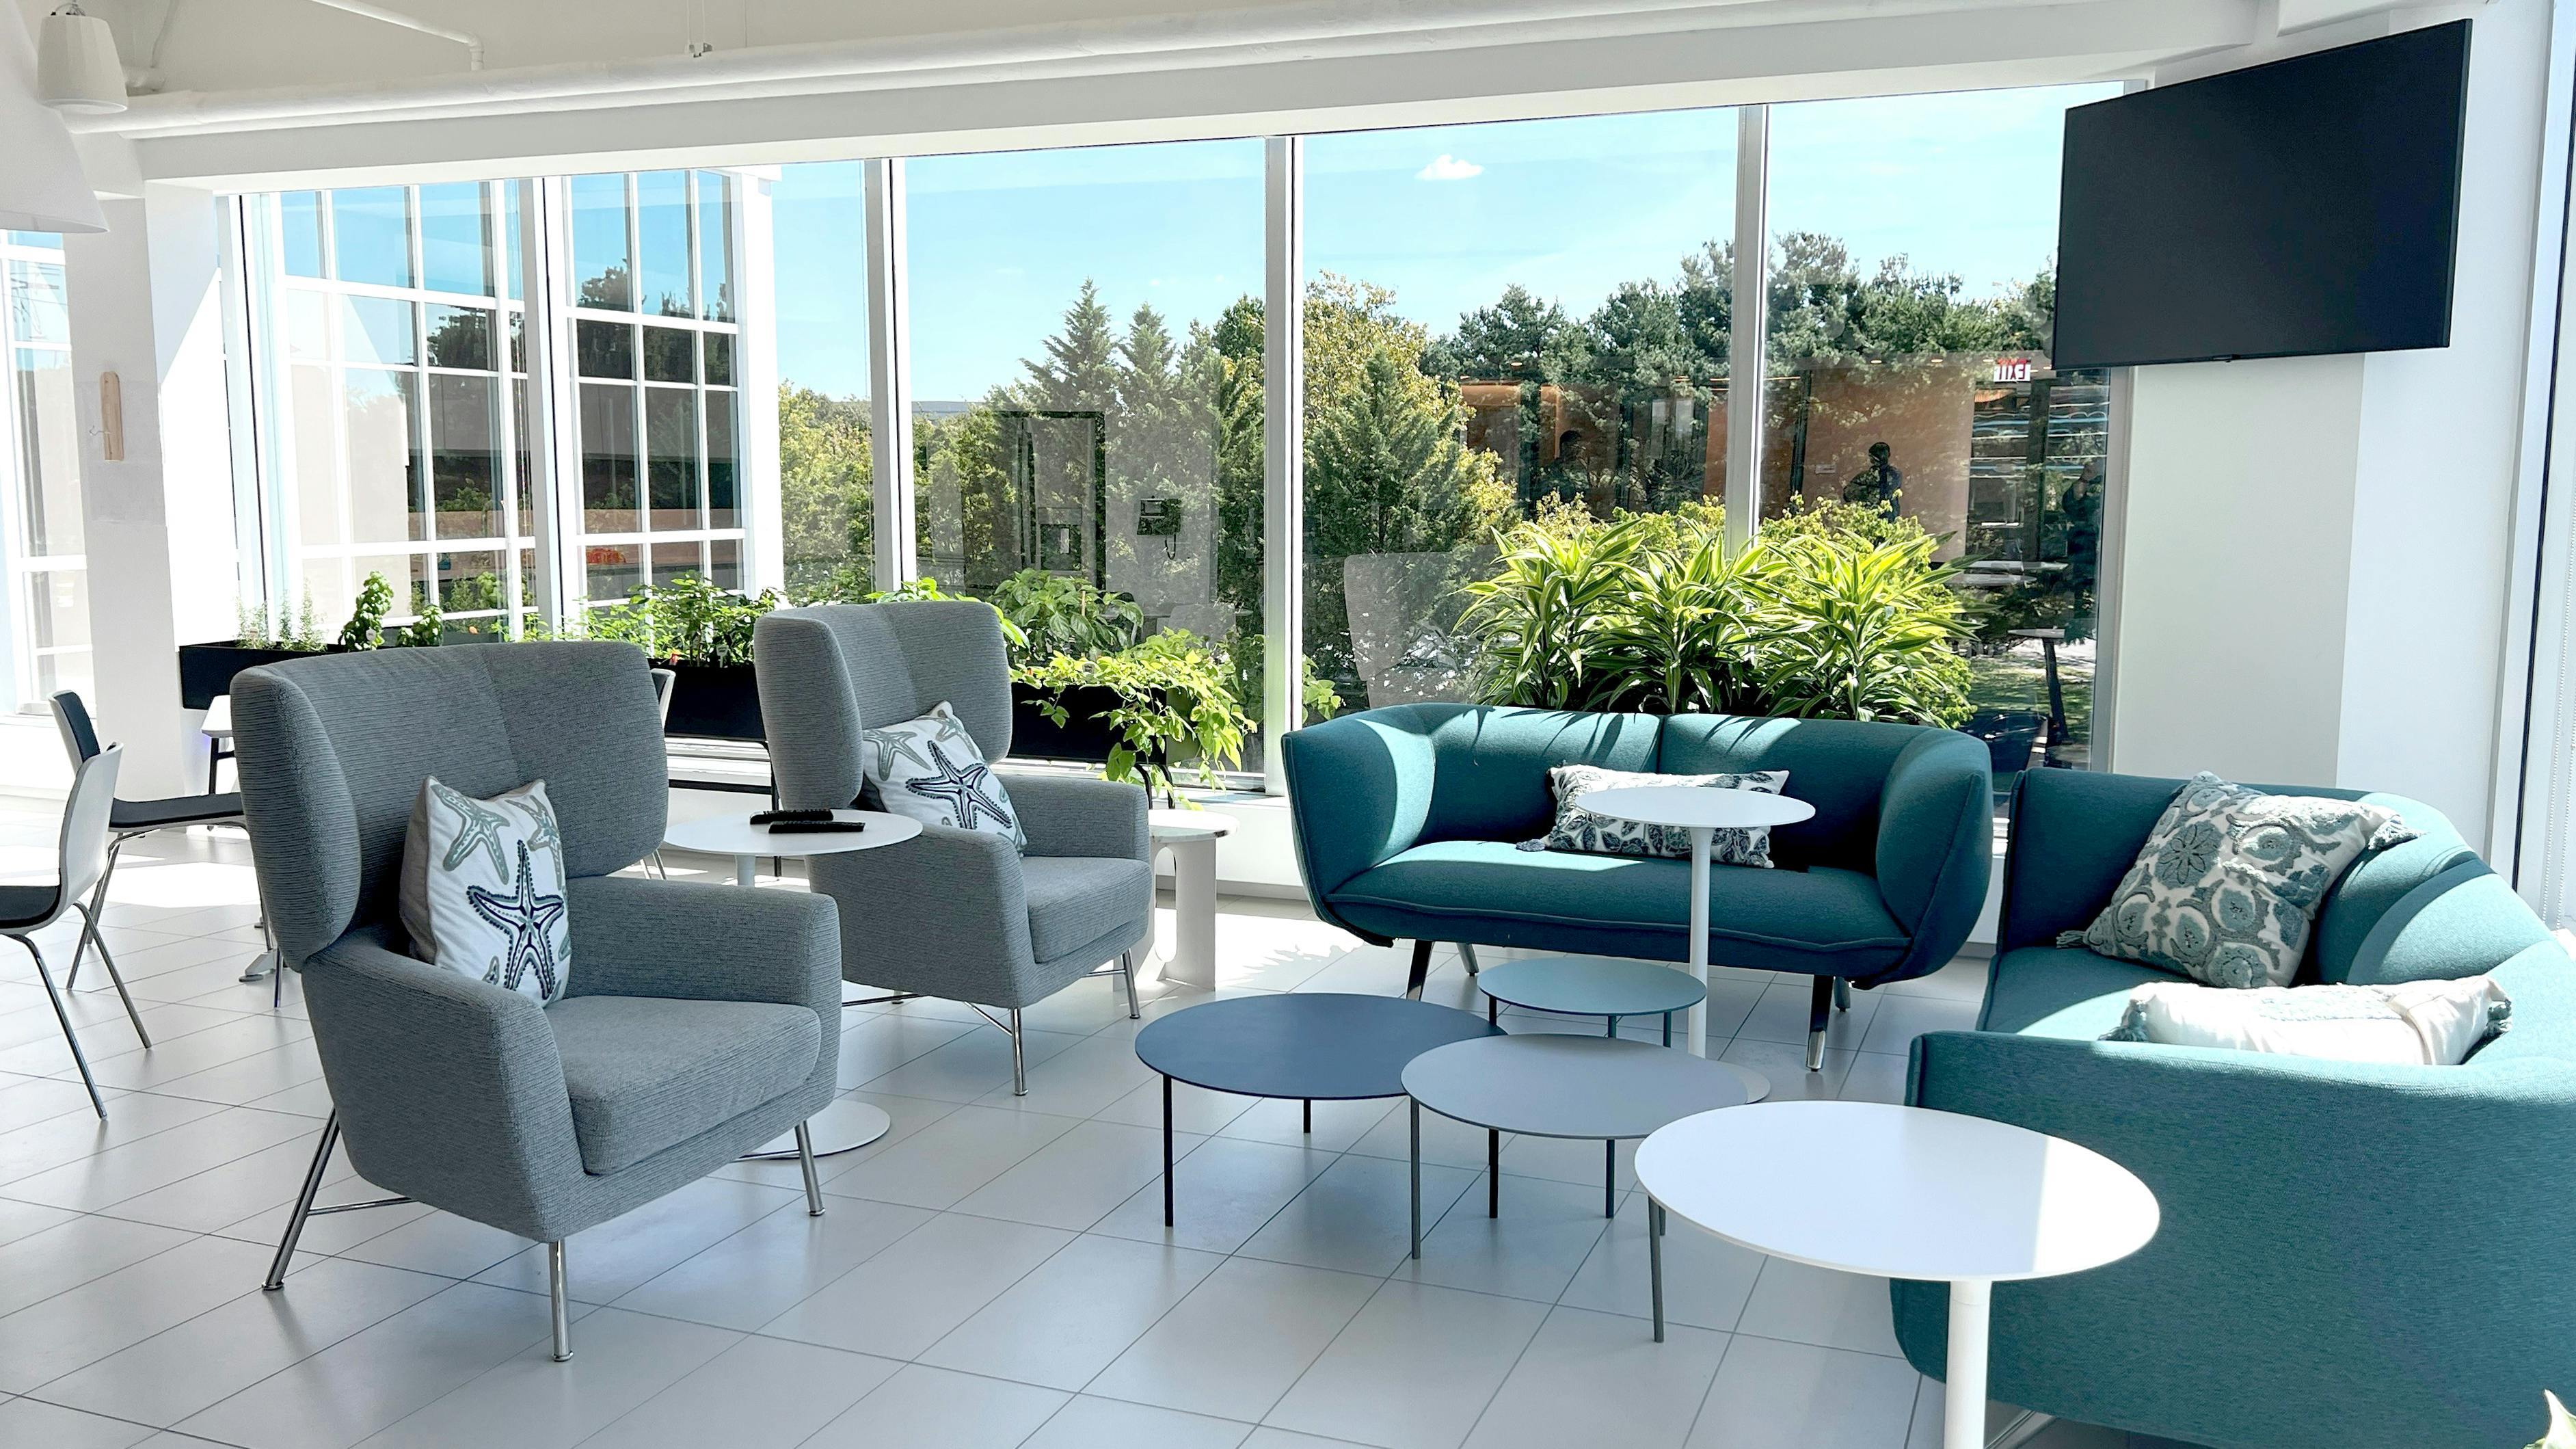 Lounge area with wingback chairs, a couch and loveseat, and small round side tables; floor-to-ceiling windows in the background show trees outside the building.